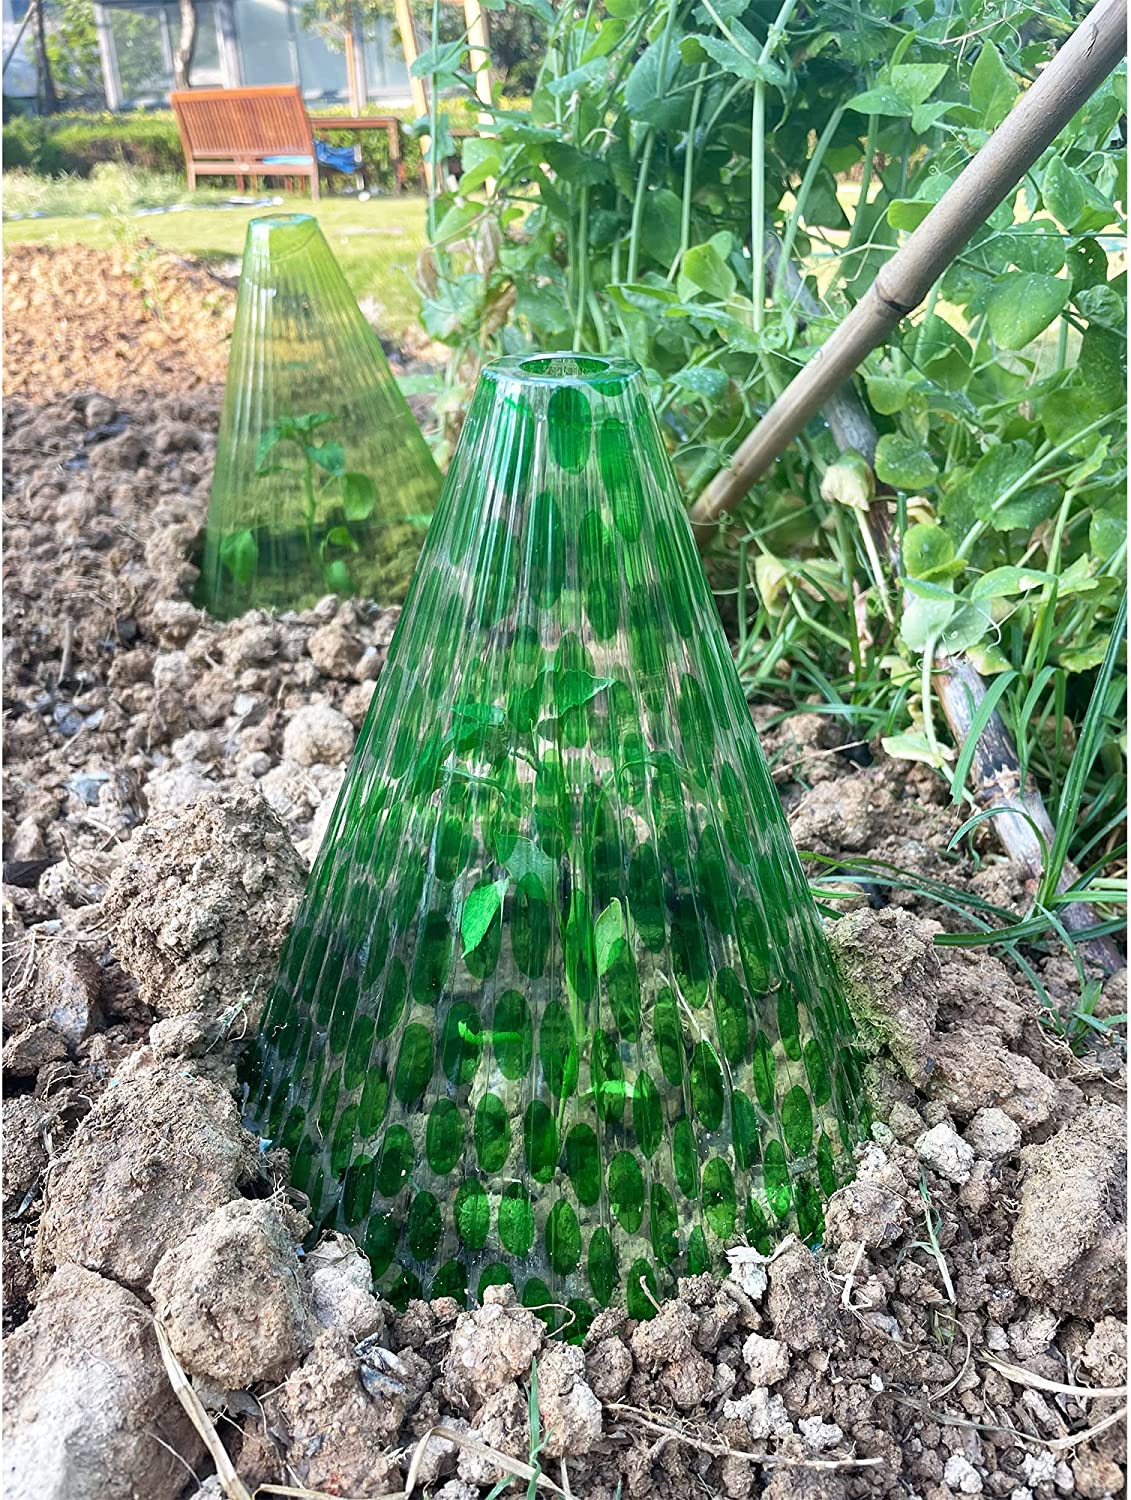 Fshow garden cloches, 20 pack reusable plant bell cover, bell jar cloches for protection against sun, frost, snails etc. (dark green)